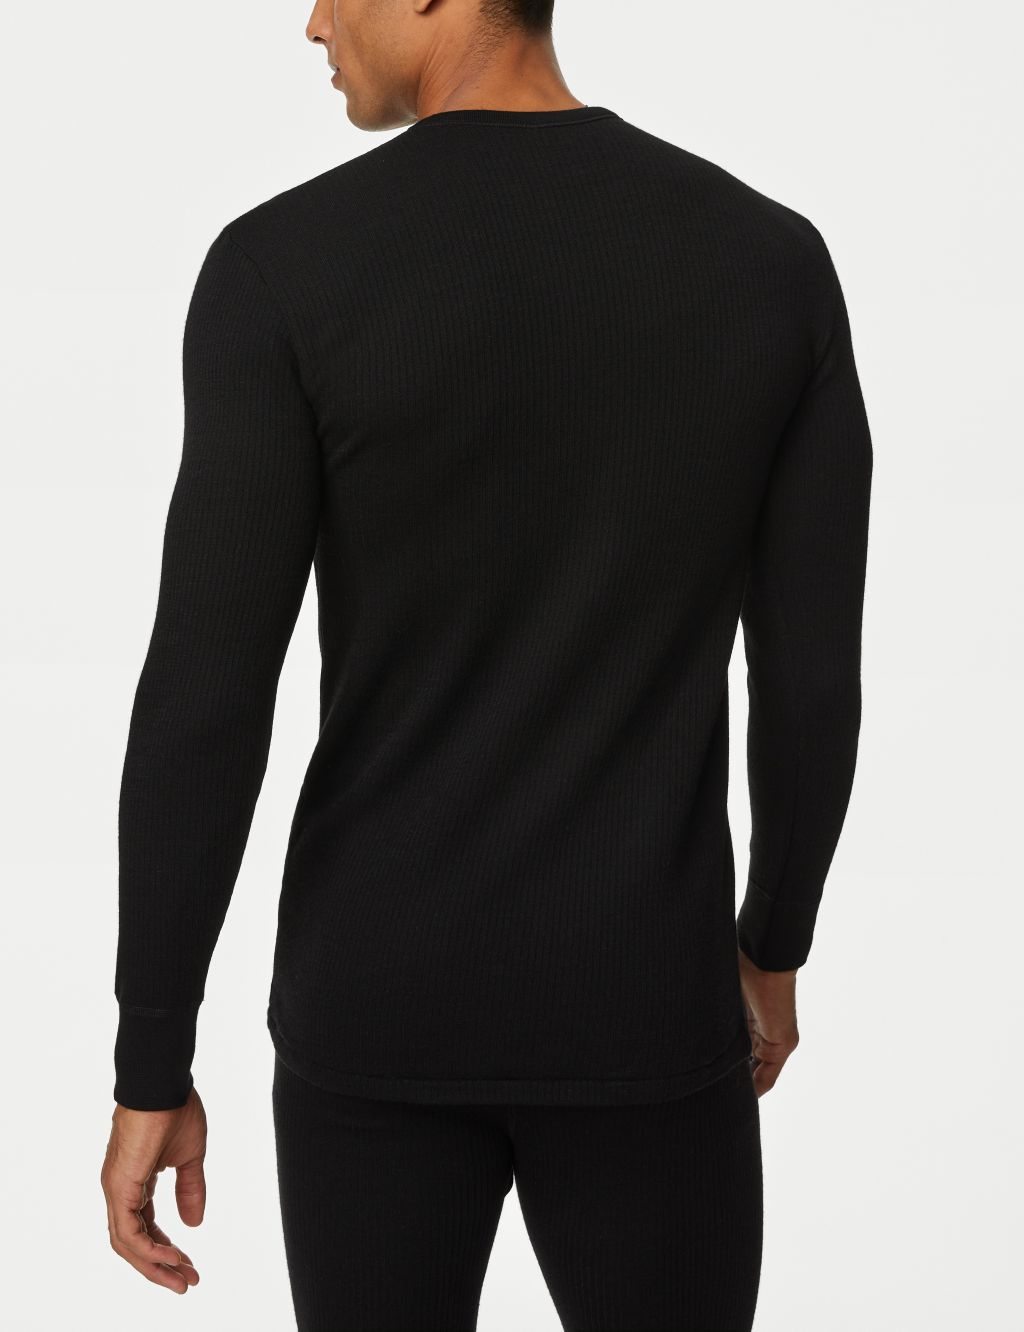 Heatgen™ Maximum Thermal Long Sleeve Top | M&S Collection | M&S